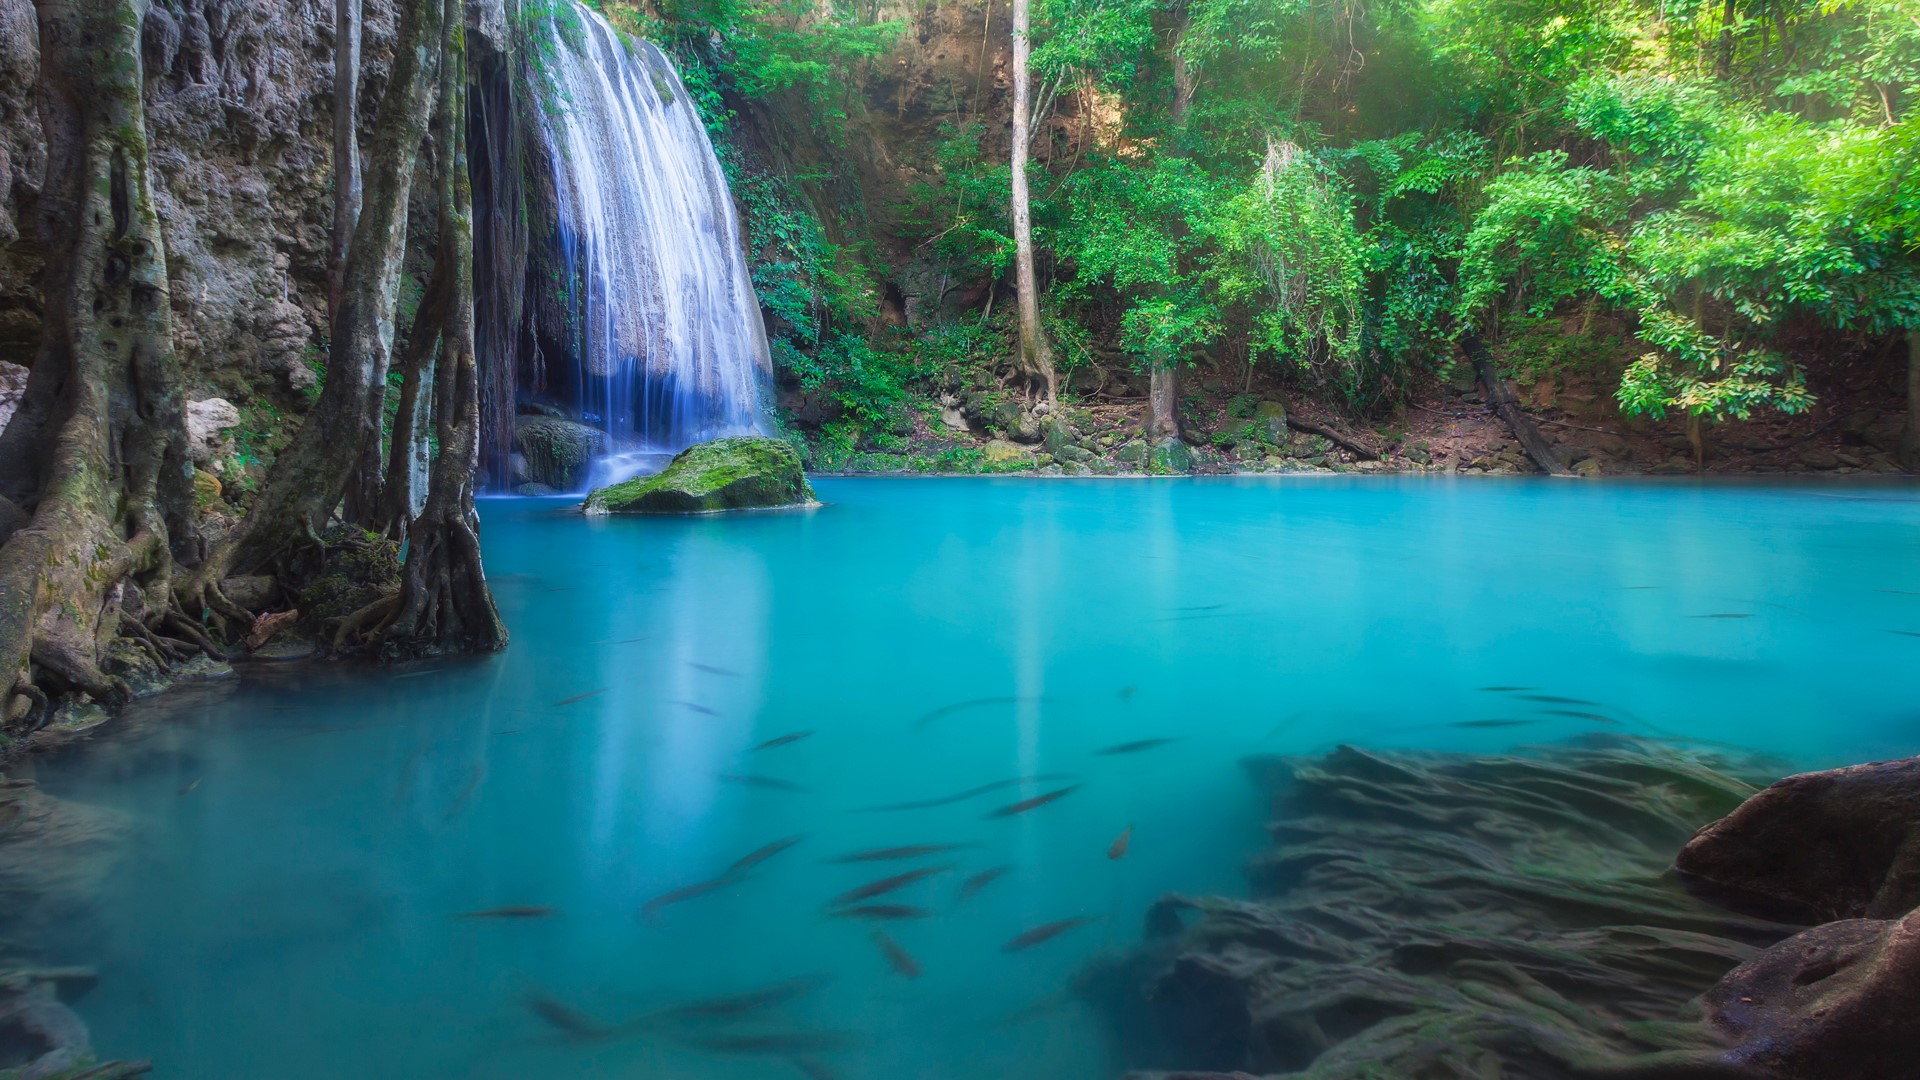 General 1920x1080 nature landscape waterfall fish clear water long exposure trees water rocks algae pond Thailand